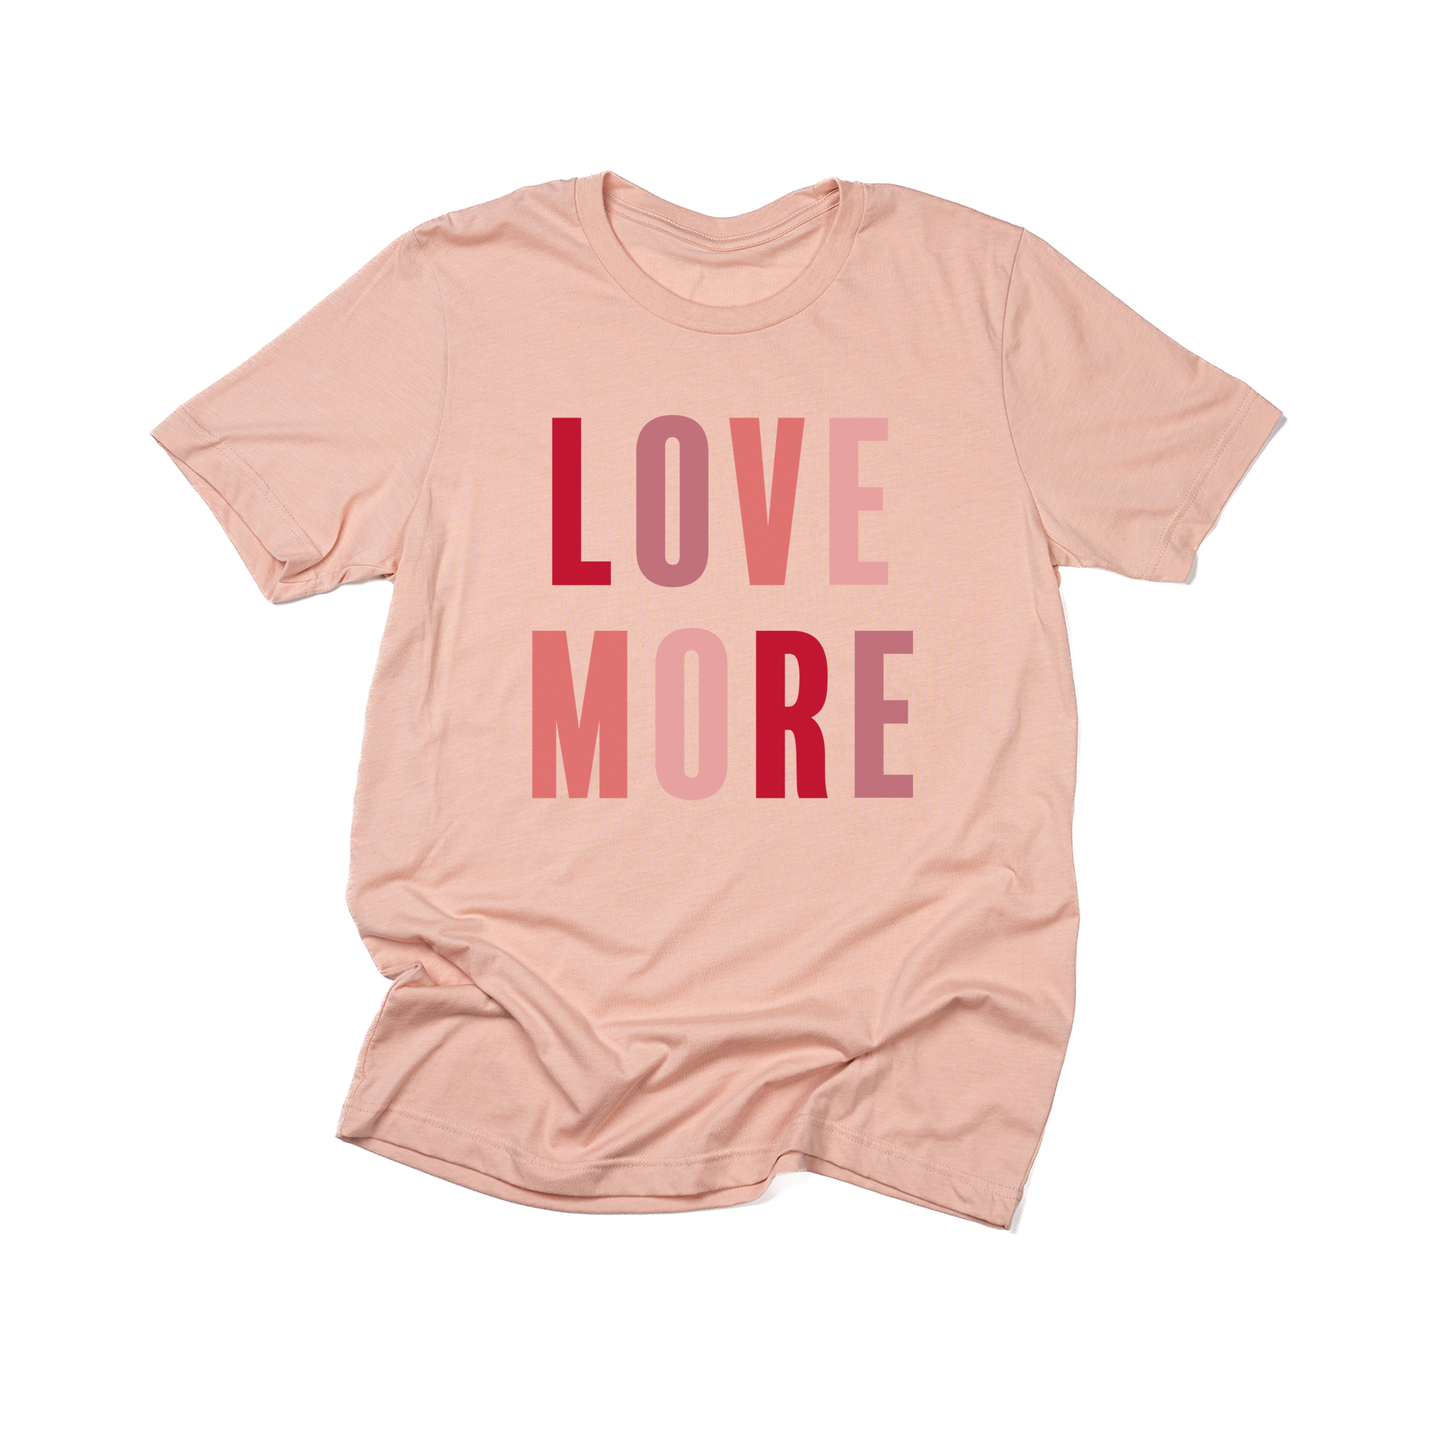 Love More (Across Front) - Tee (Peach)